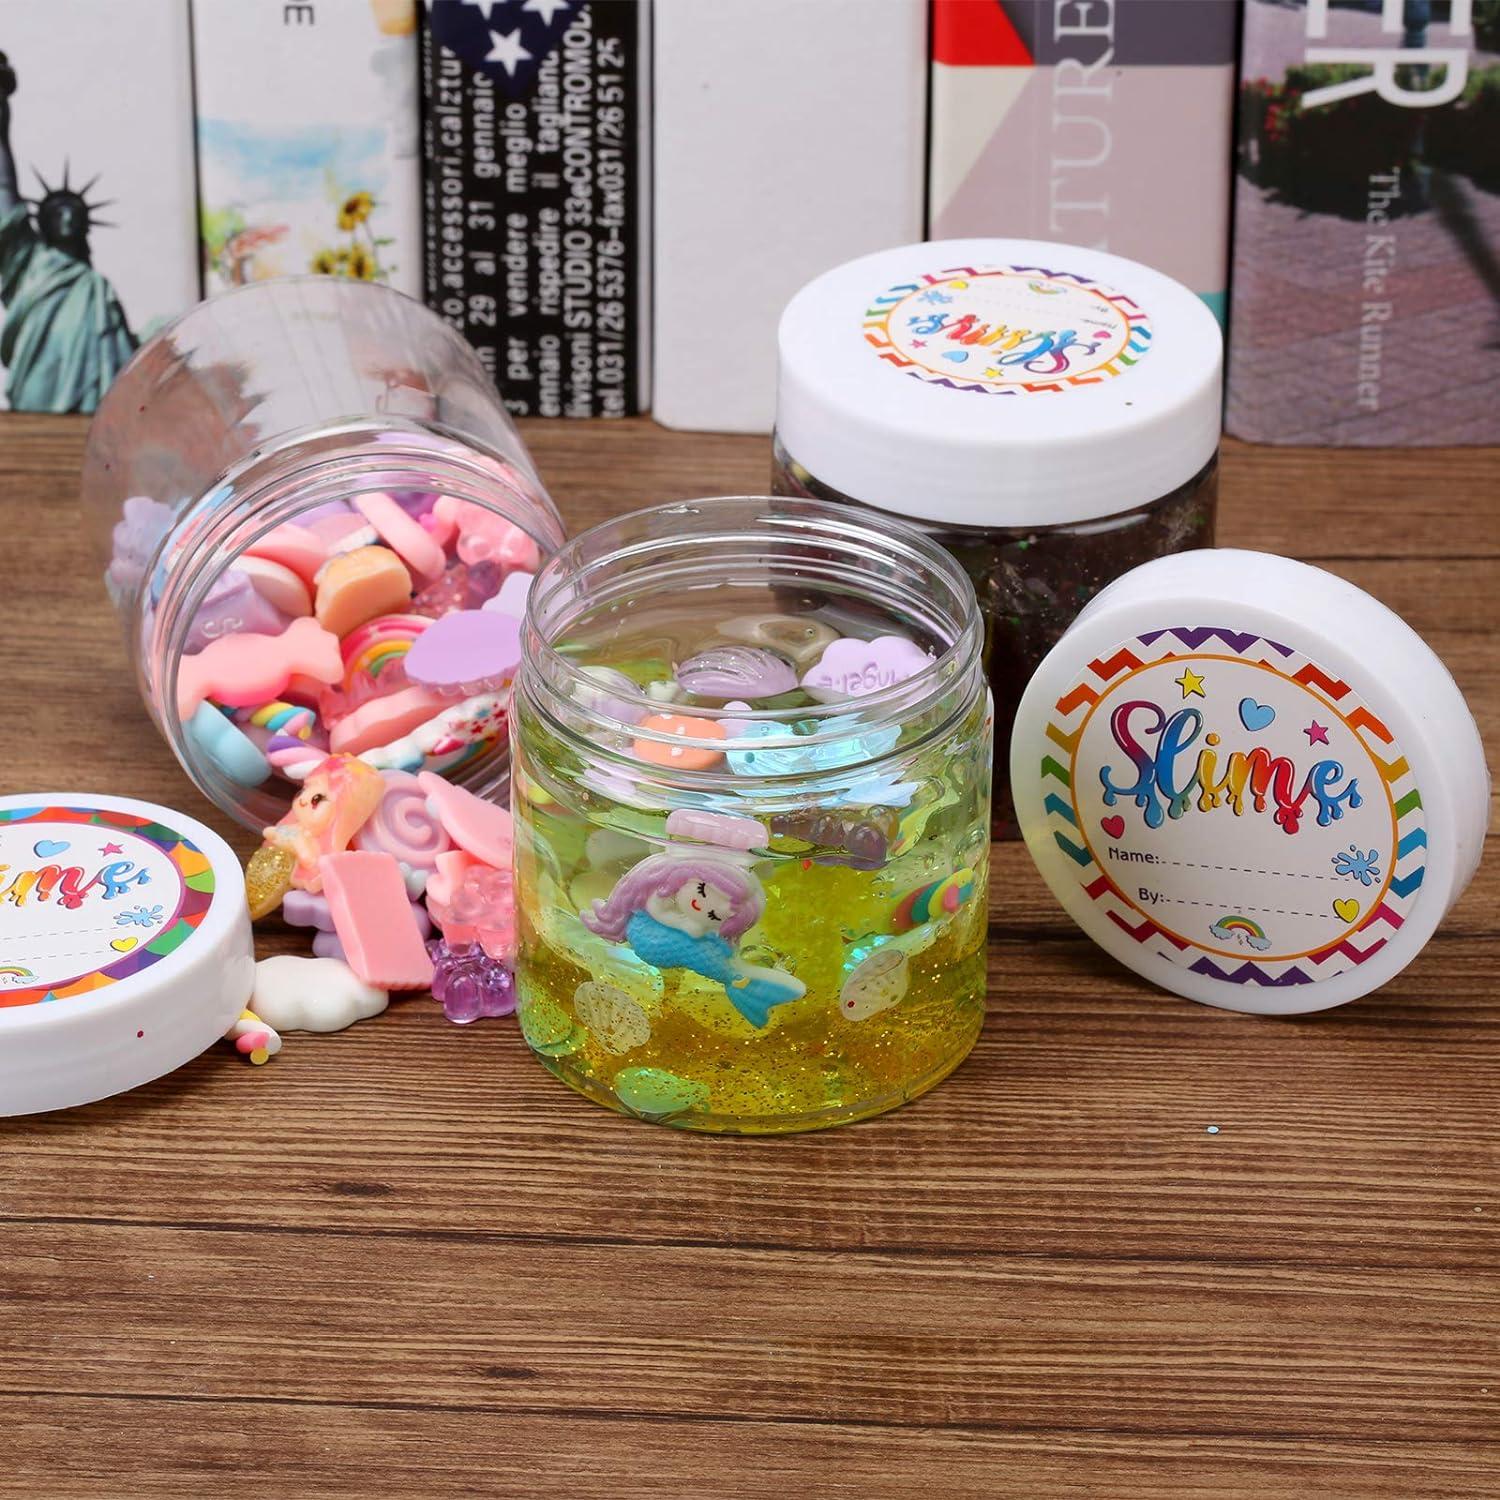 slime storage jars 6 oz (in 6, 18, and 30 packs) - clear all purpose  containers - for all glue putty making - art, craft and hobby storage  containers